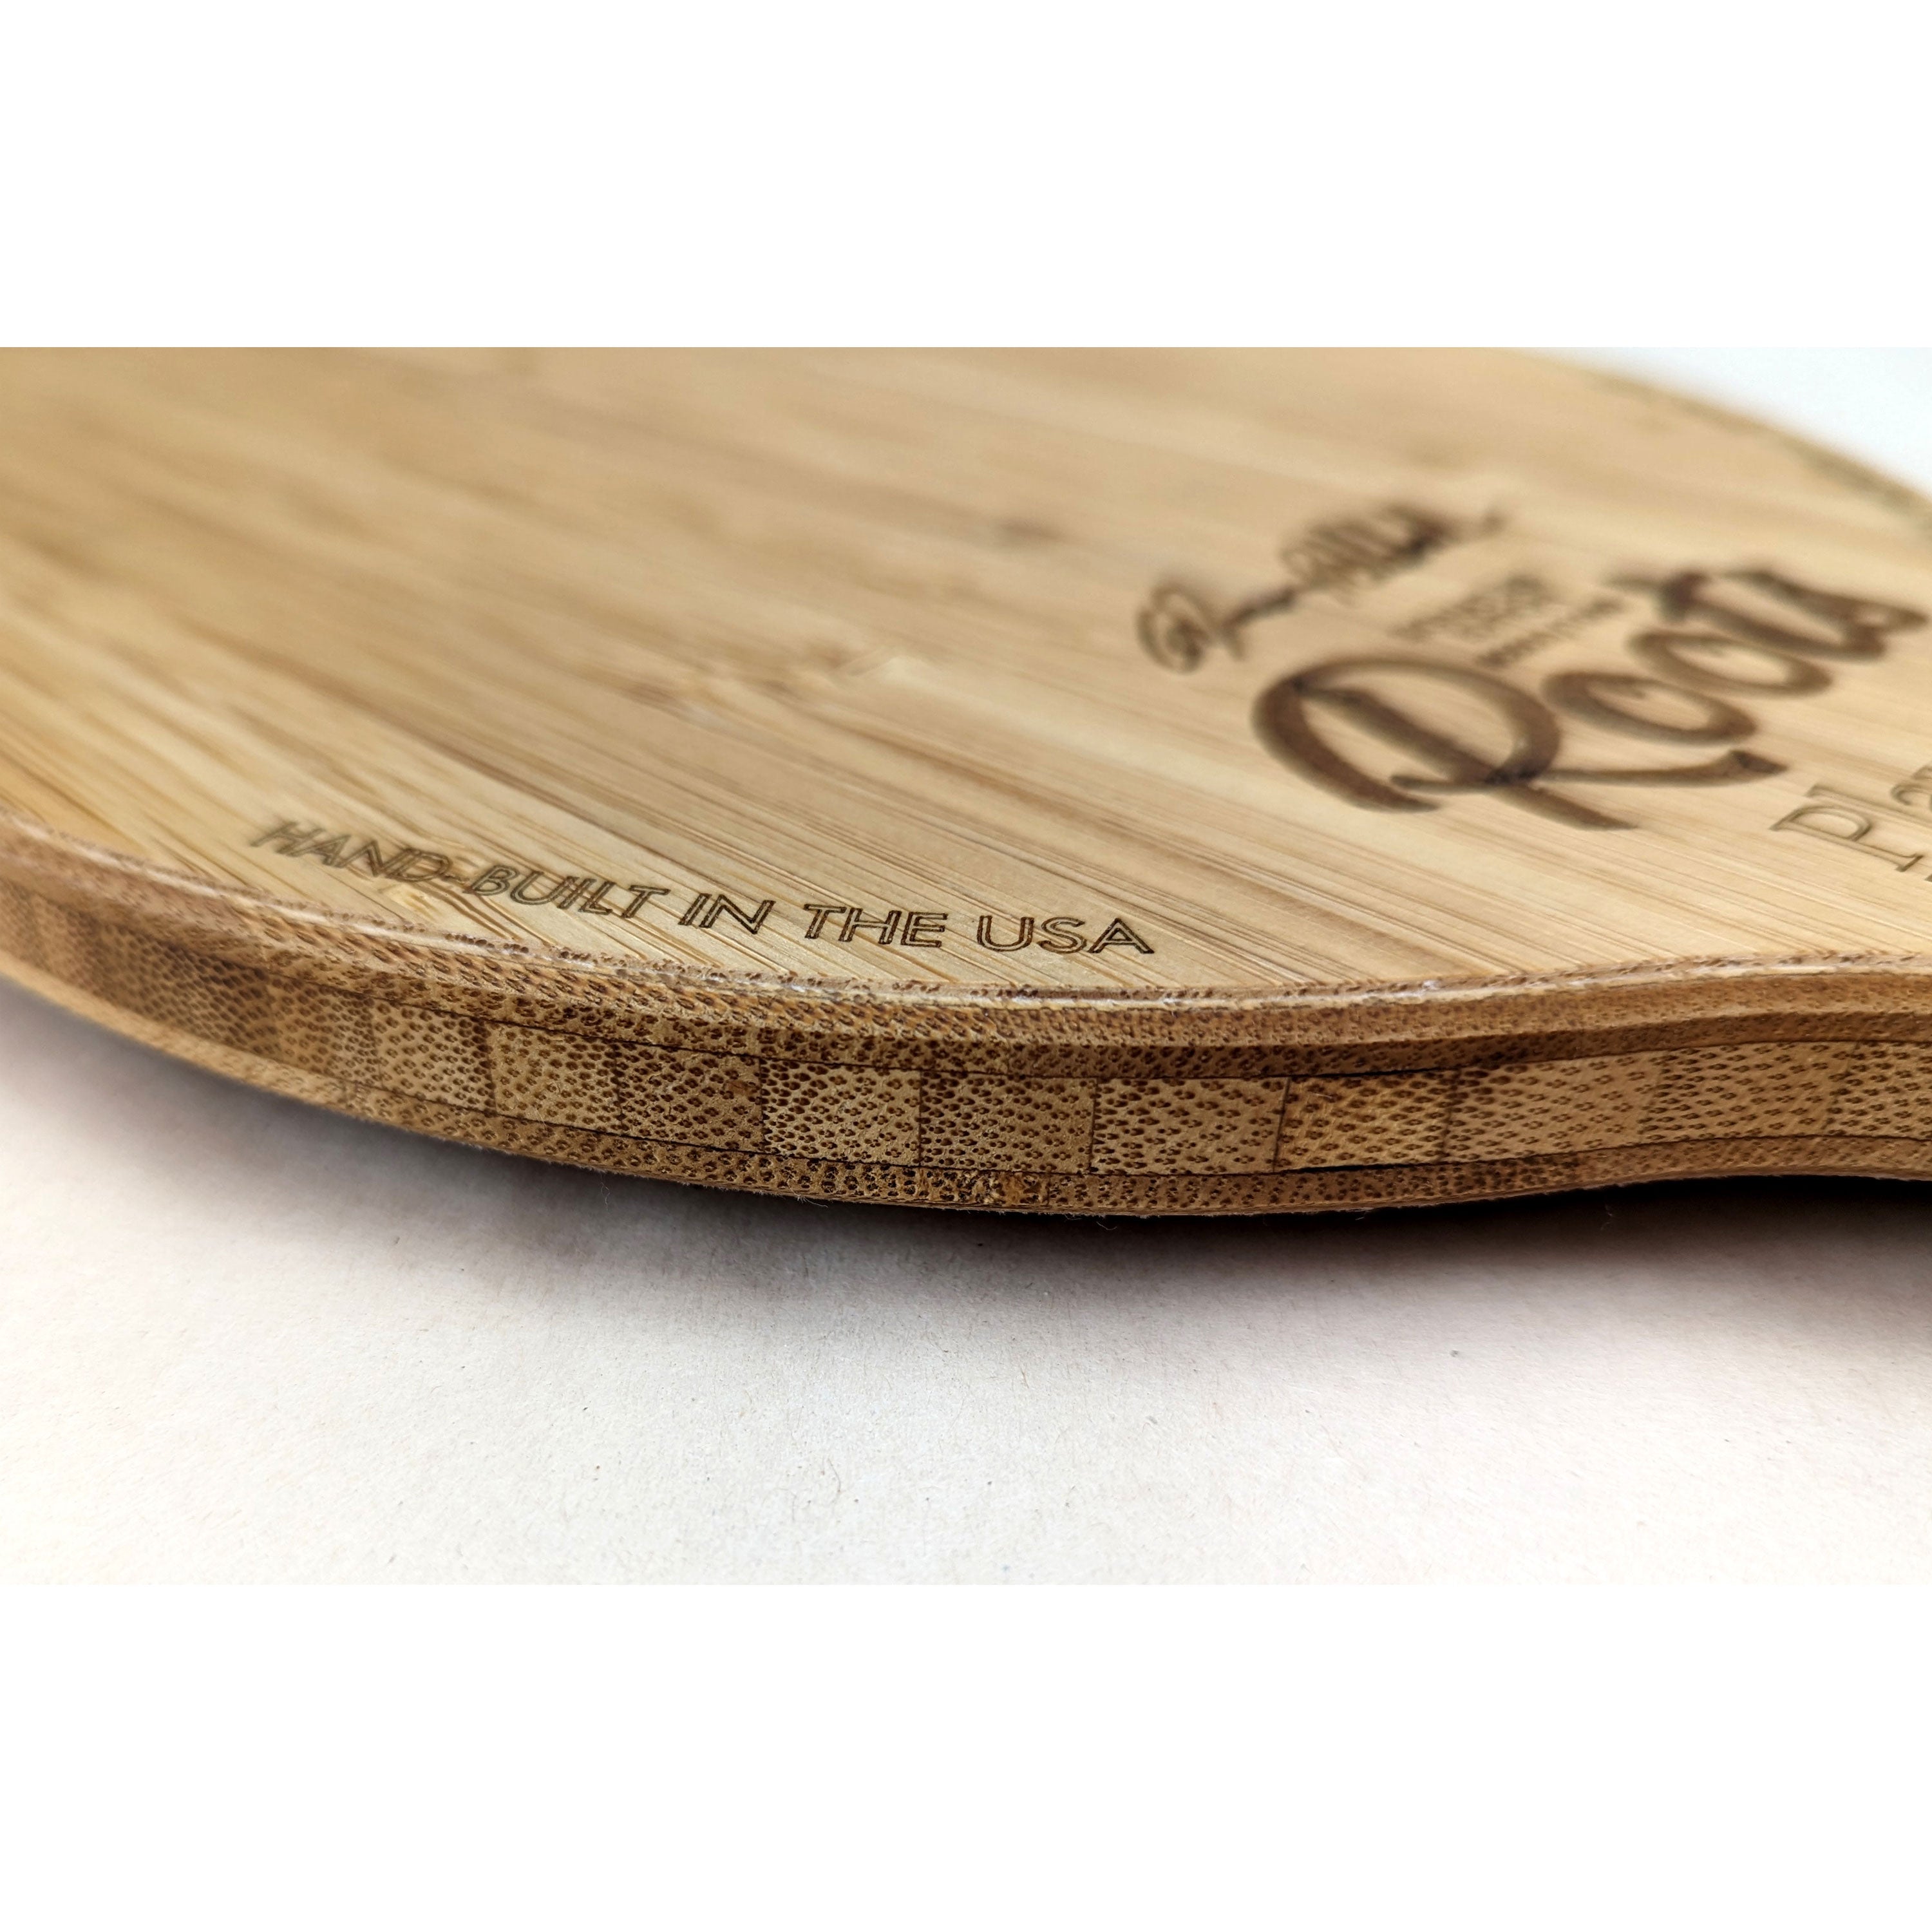 Roots: Limited Edition Signature Paddle Pre-Order (Only 1000 will be made!)